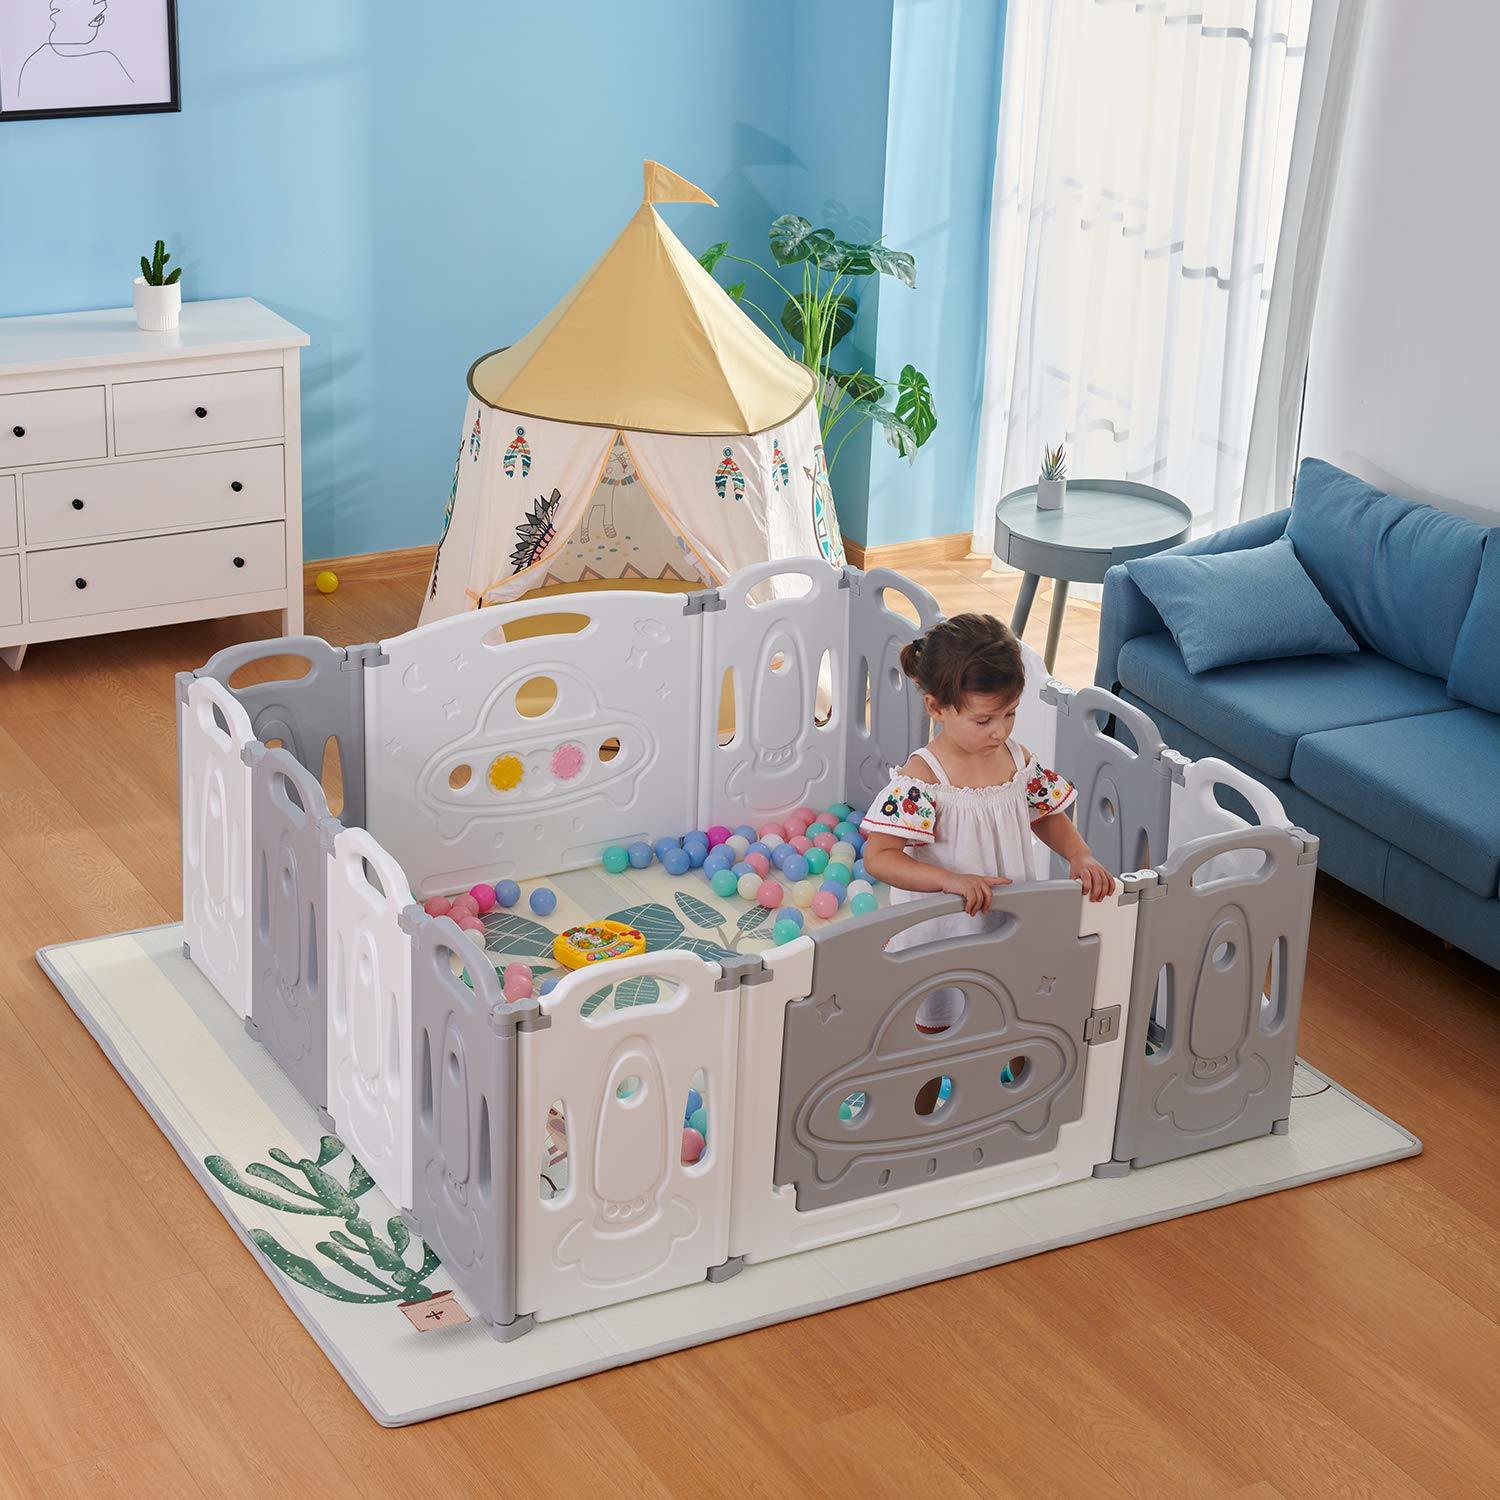 Foldable Baby playpen Baby Folding Play Pen Kids Activity Centre Safety Play Yard Home Indoor Outdoor New Pen